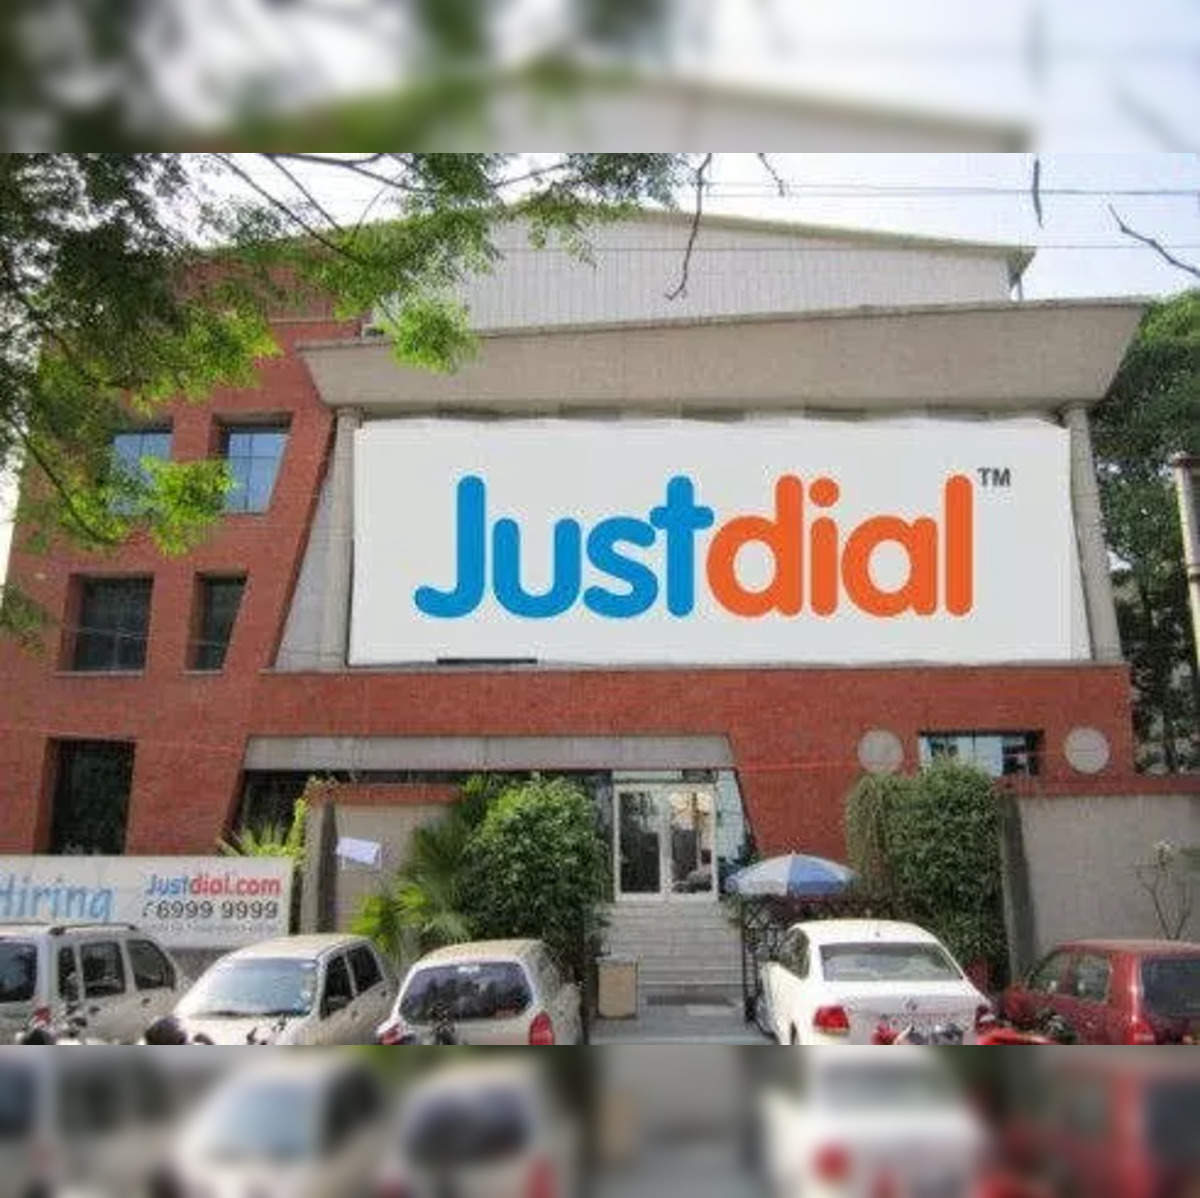 Top Pay & Park Services in Bangalore - Best Pay & Park Services - Justdial